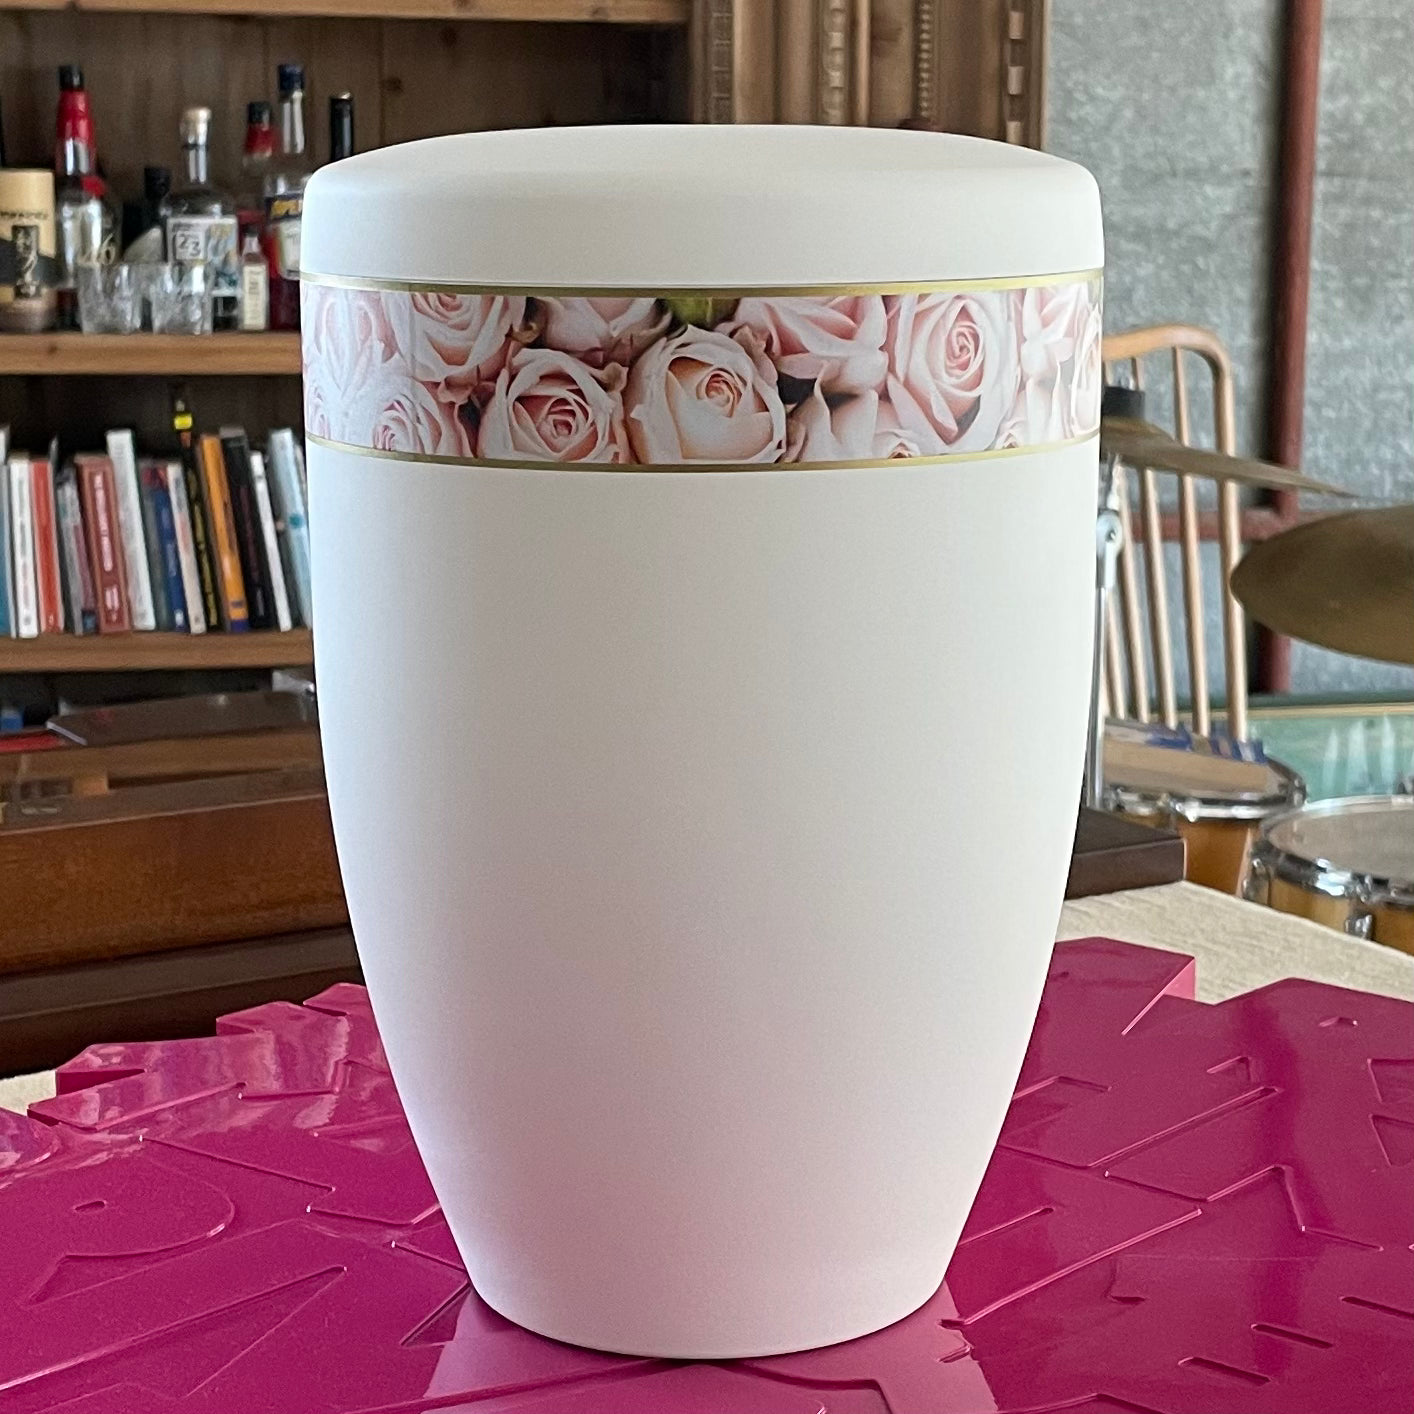 Beautiful white urn for ashes with its band of delicate pink roses sitting on pink artwork.